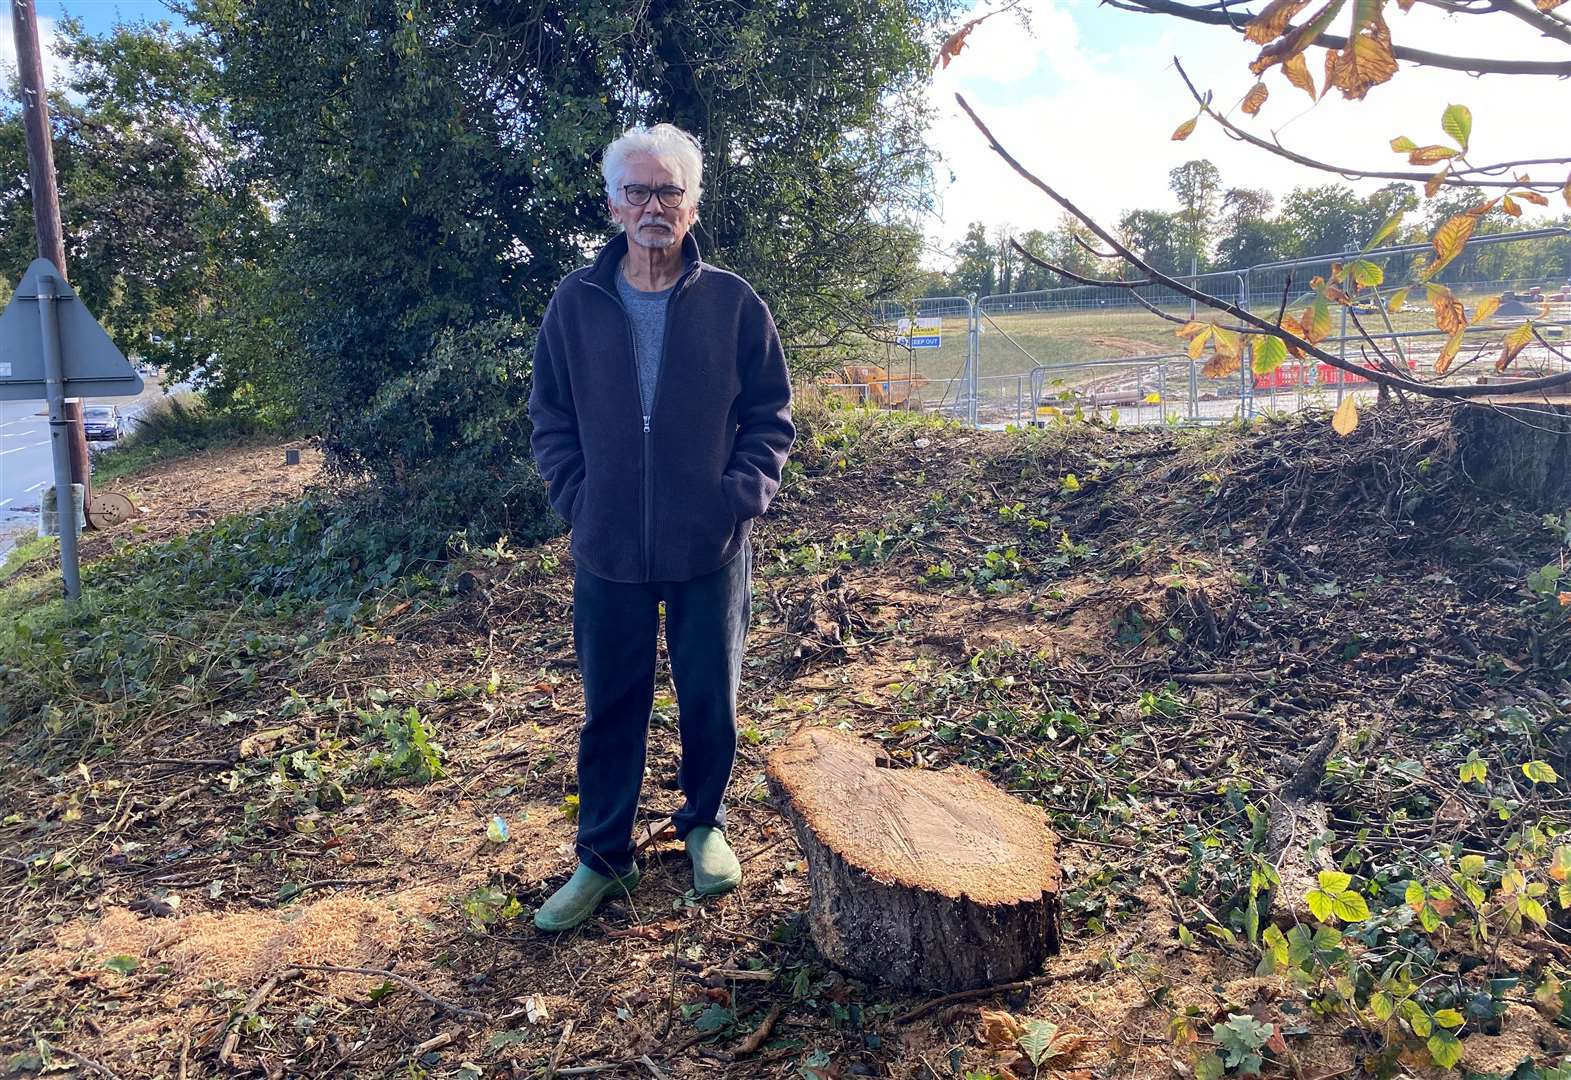 Resident Nigel Fowler, 72, is concerned over the destruction of trees and the affect the slip road would have on congestion